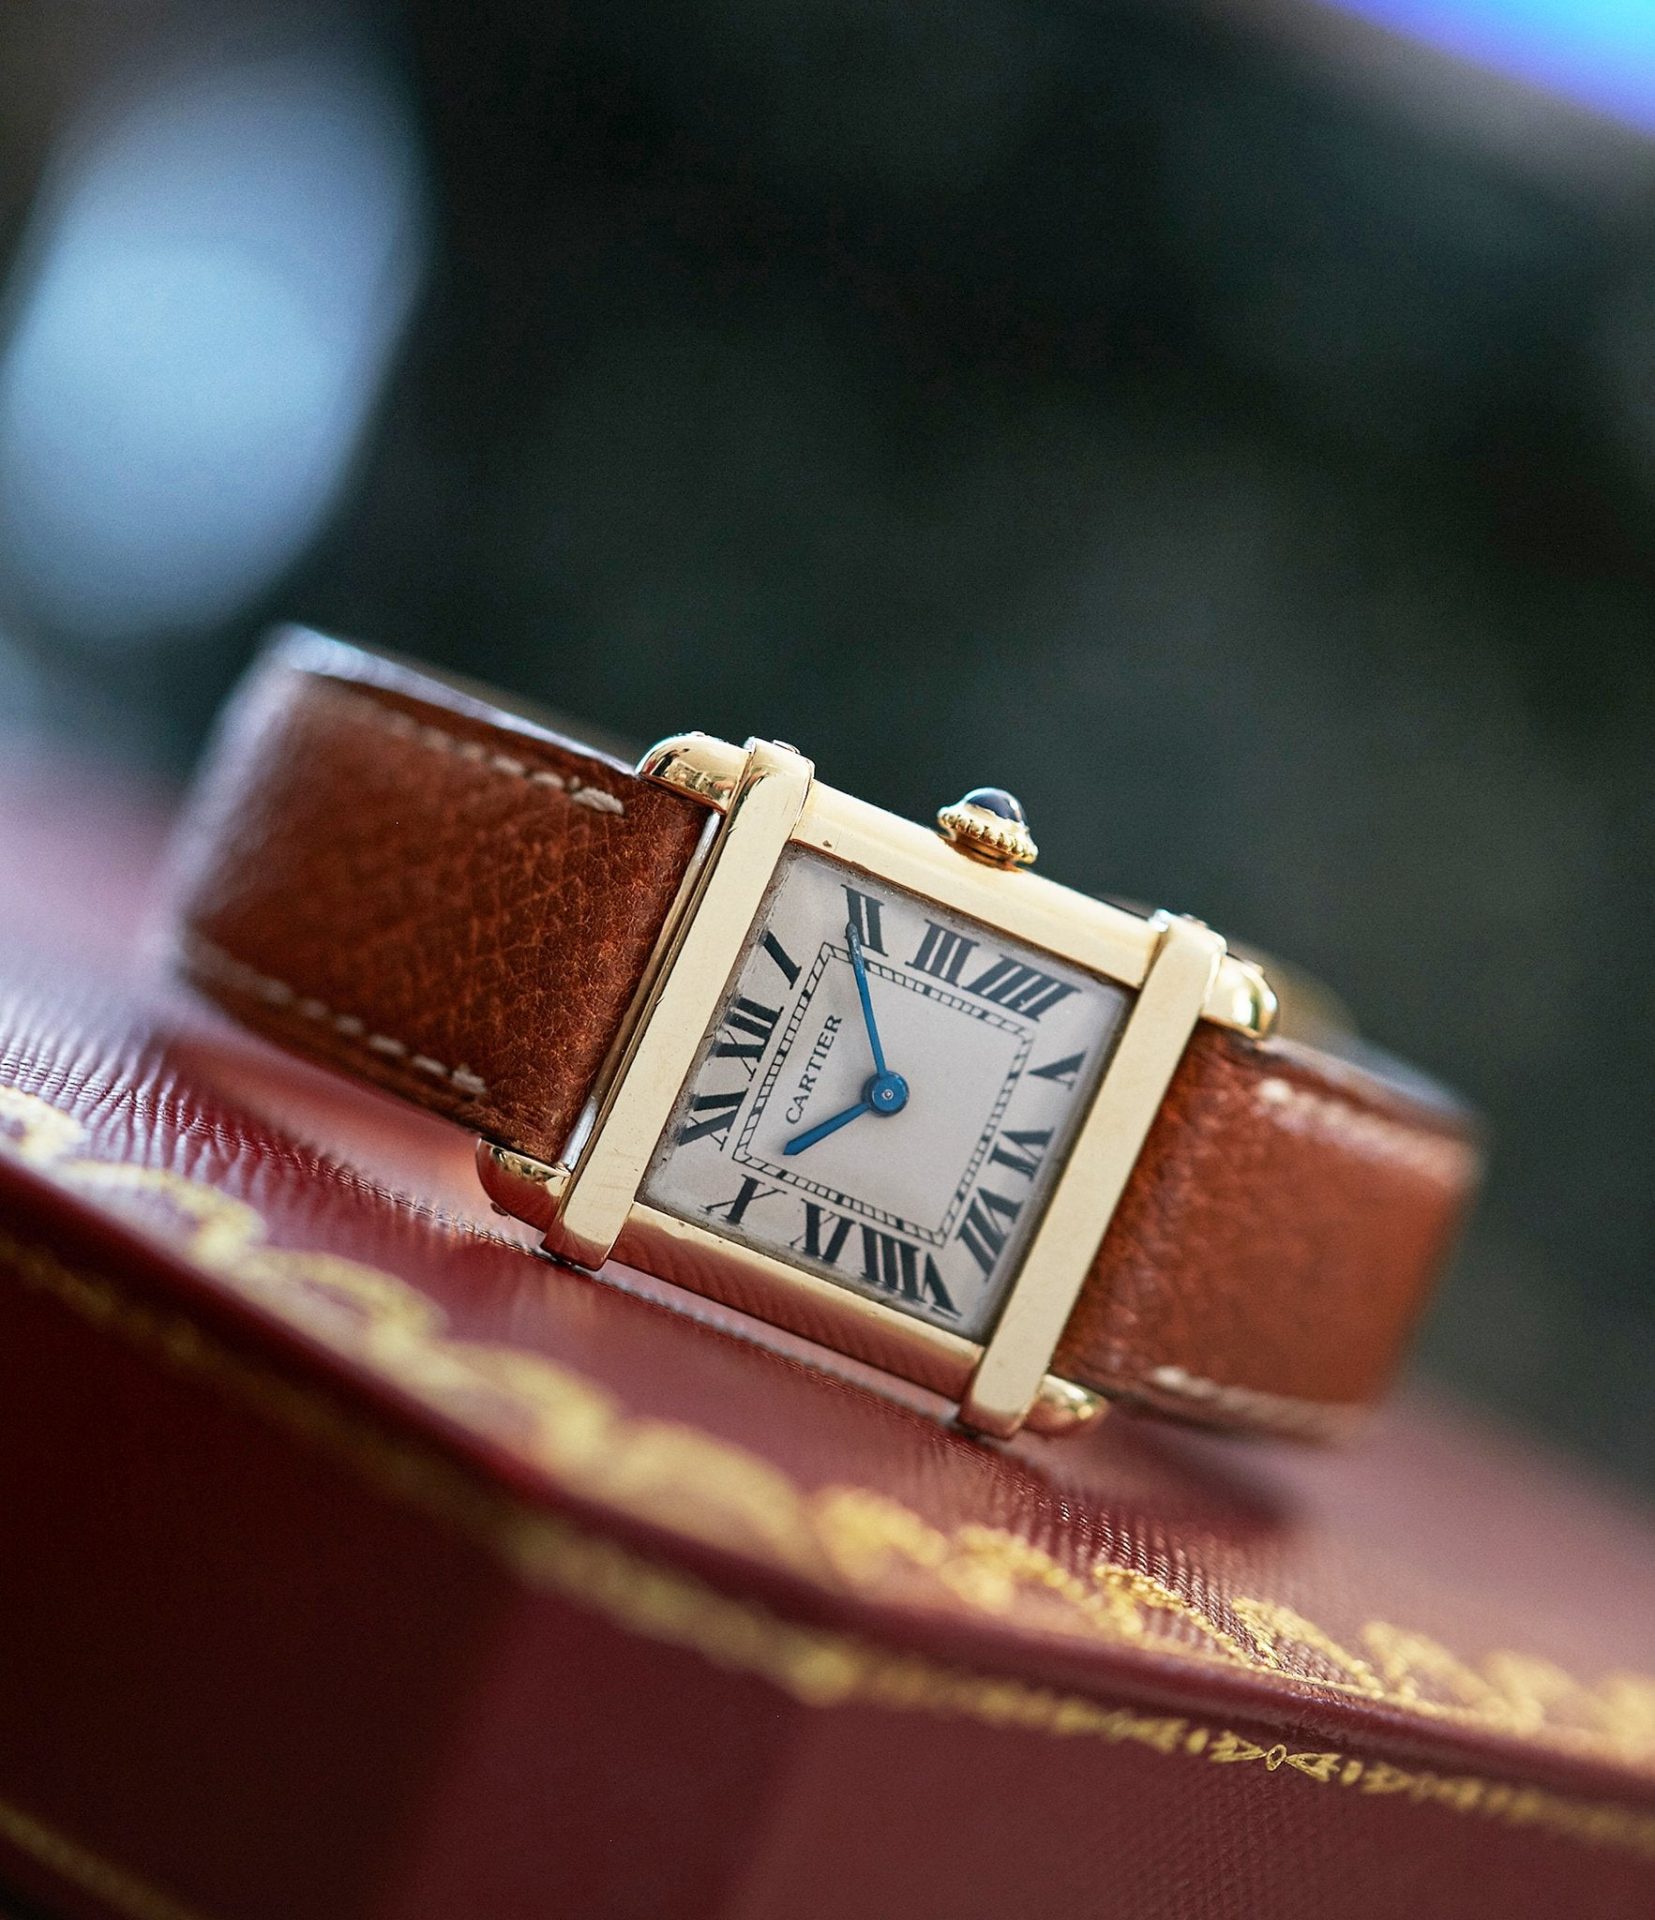 Cartier watch on box In A Collector’s Guide to the “Collection Privée Cartier Paris” for A Collected Man London